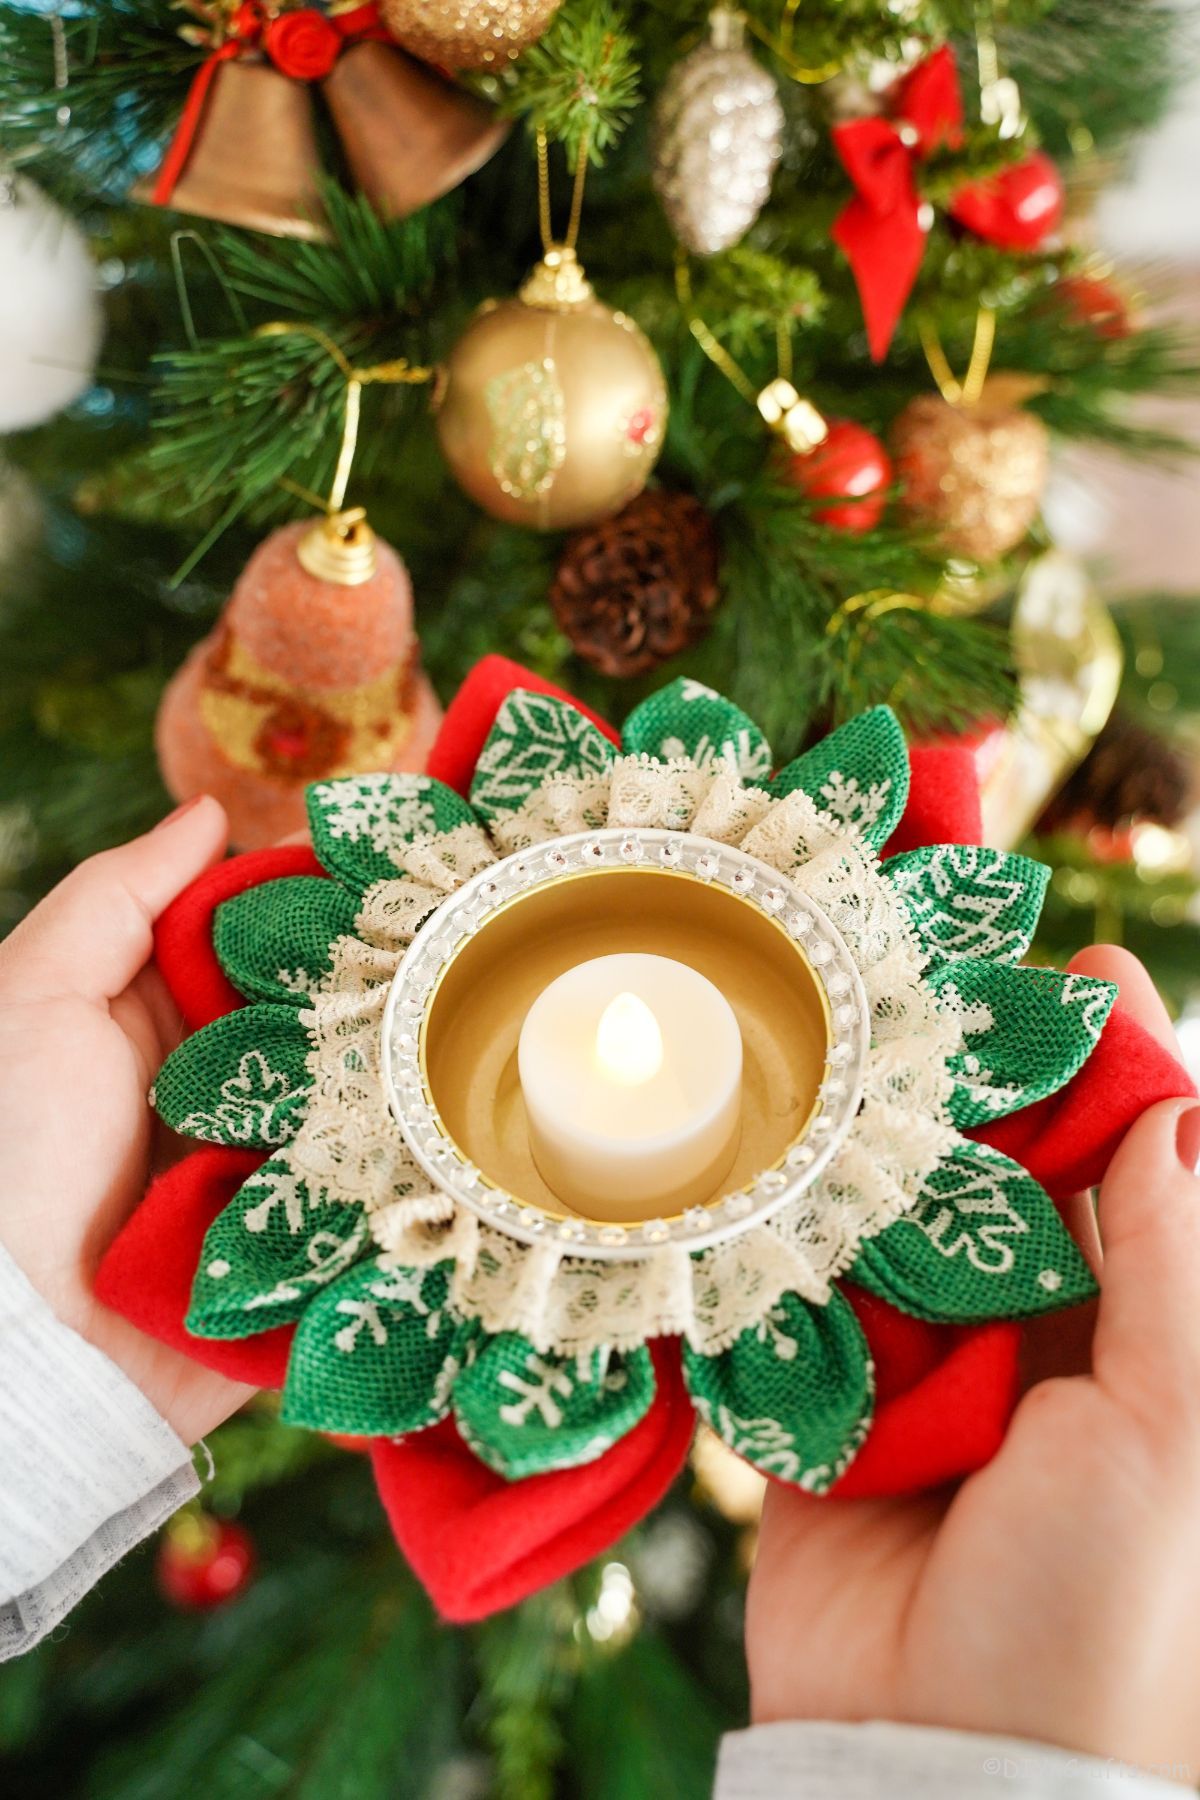 hands holding flower candle holder by holiday tree